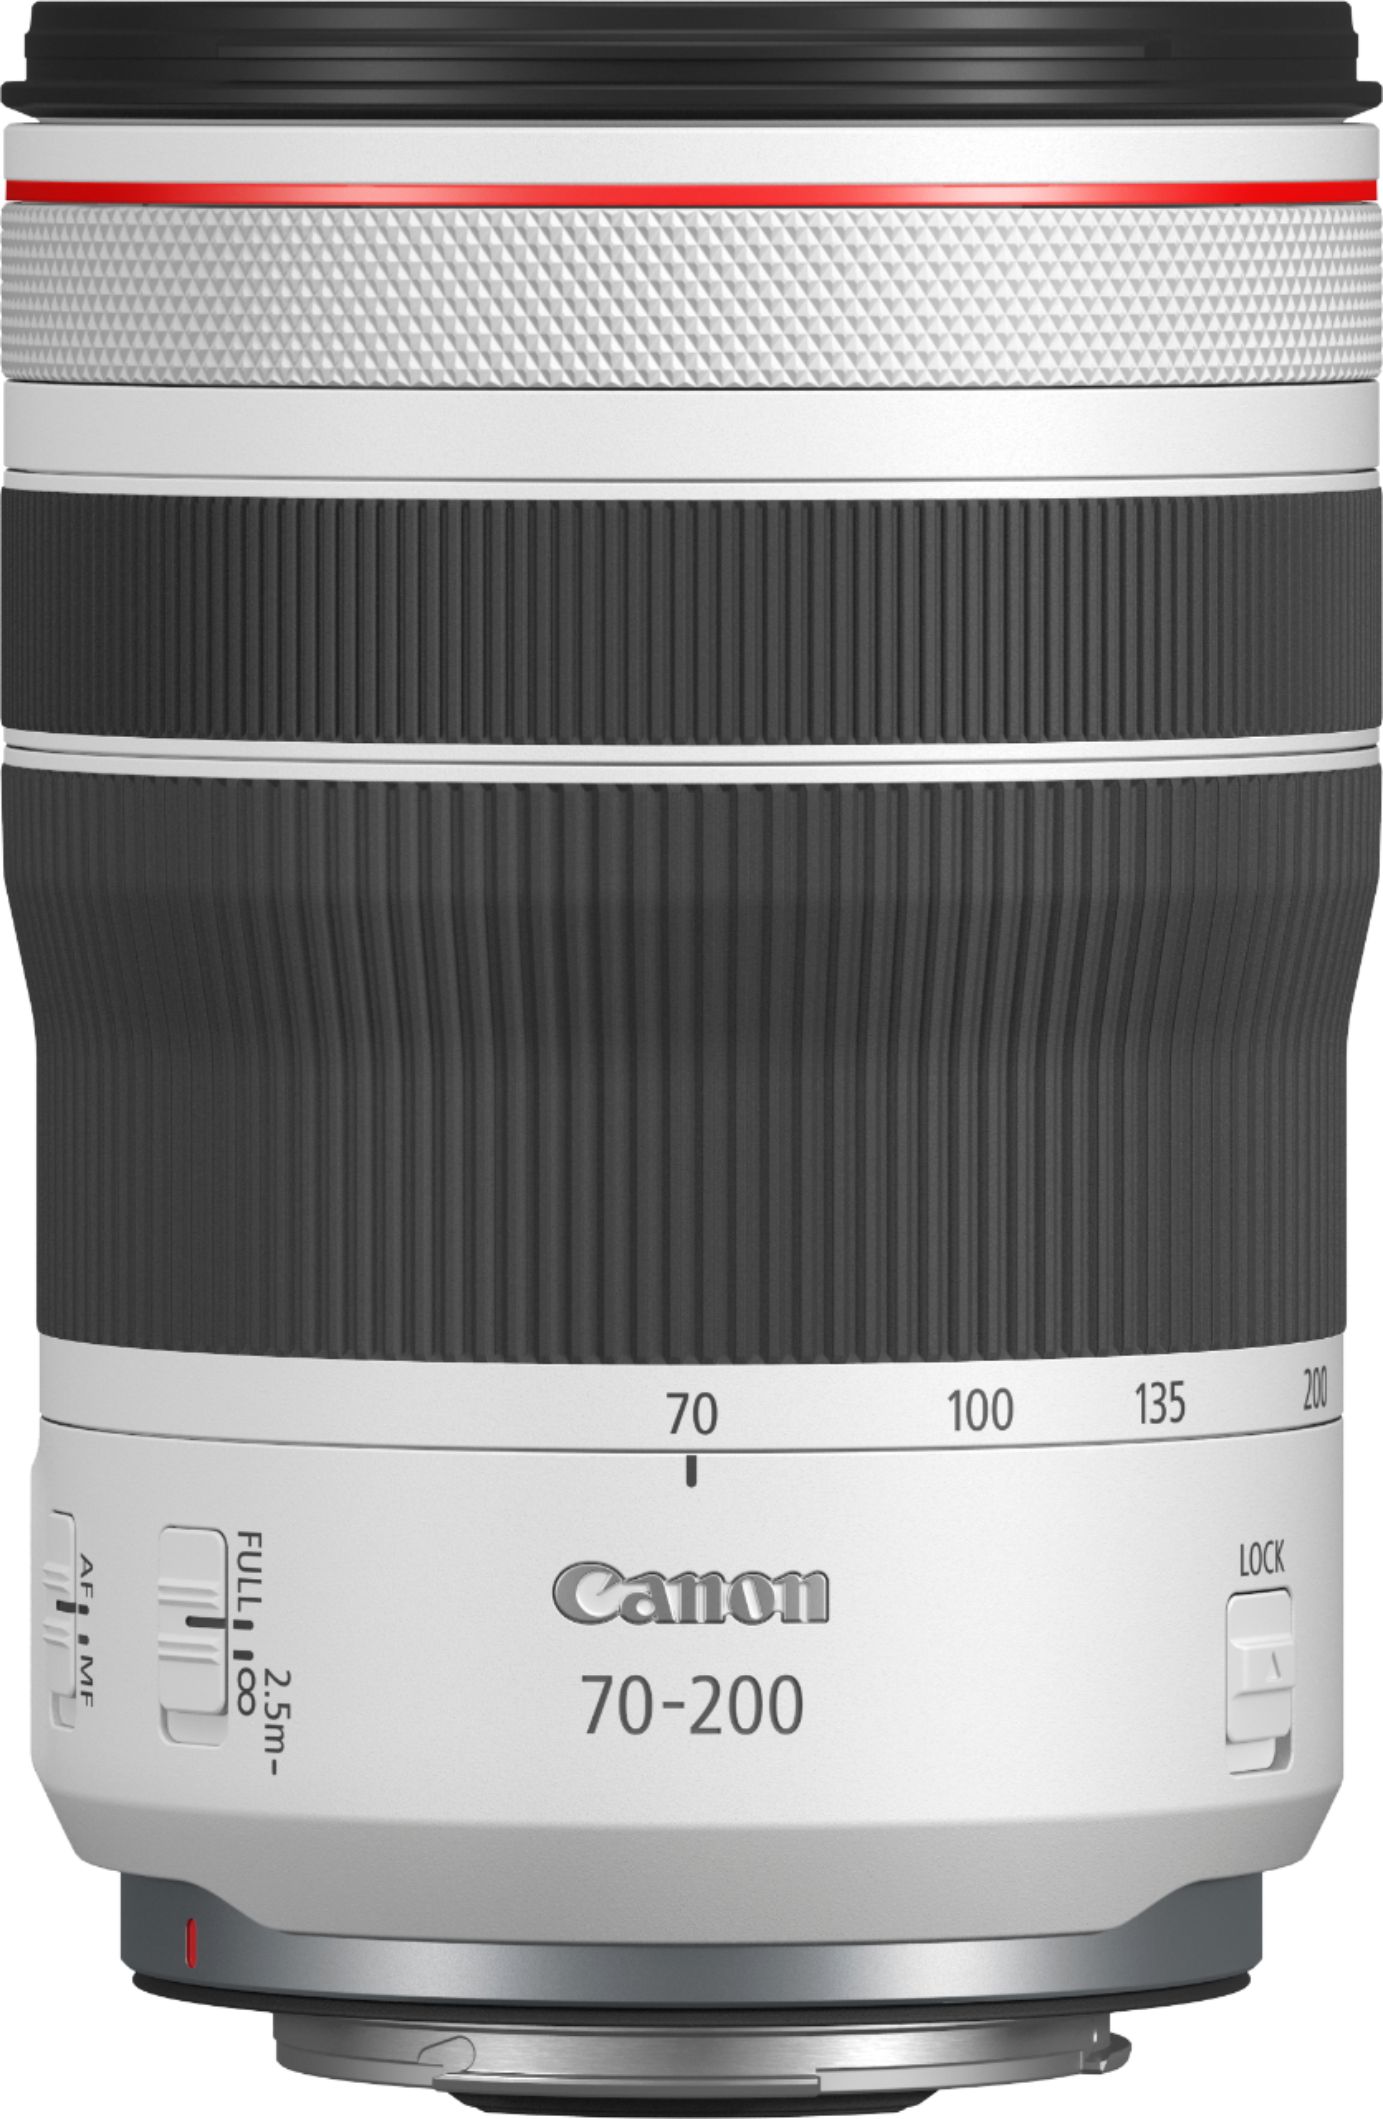 Canon RF 70-200mm f/4 L IS USM Telephoto Zoom Lens for RF Mount Cameras  White 4318C002 - Best Buy